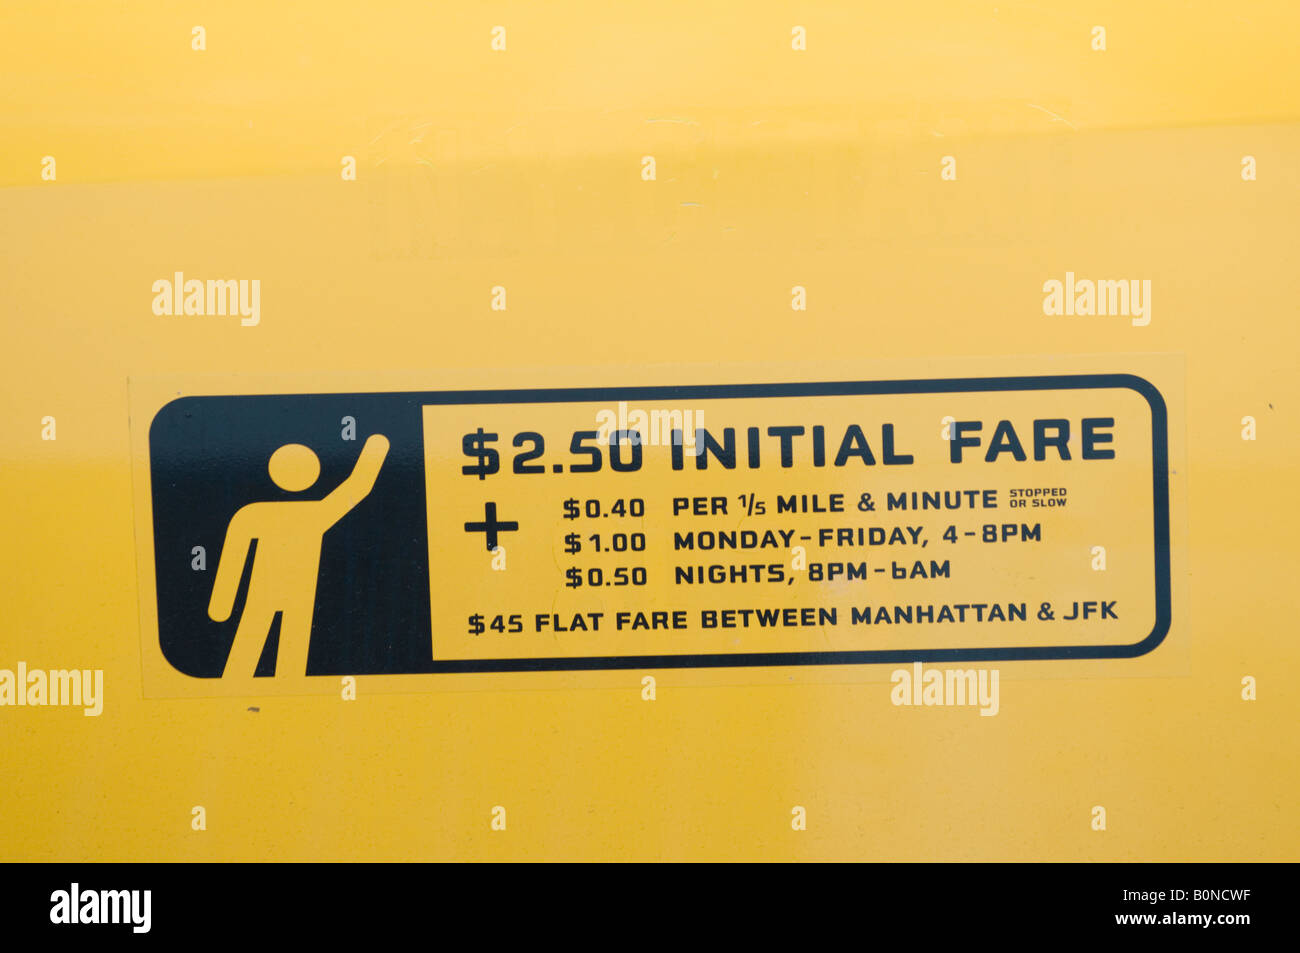 New York City taxi cab fare details Stock Photo